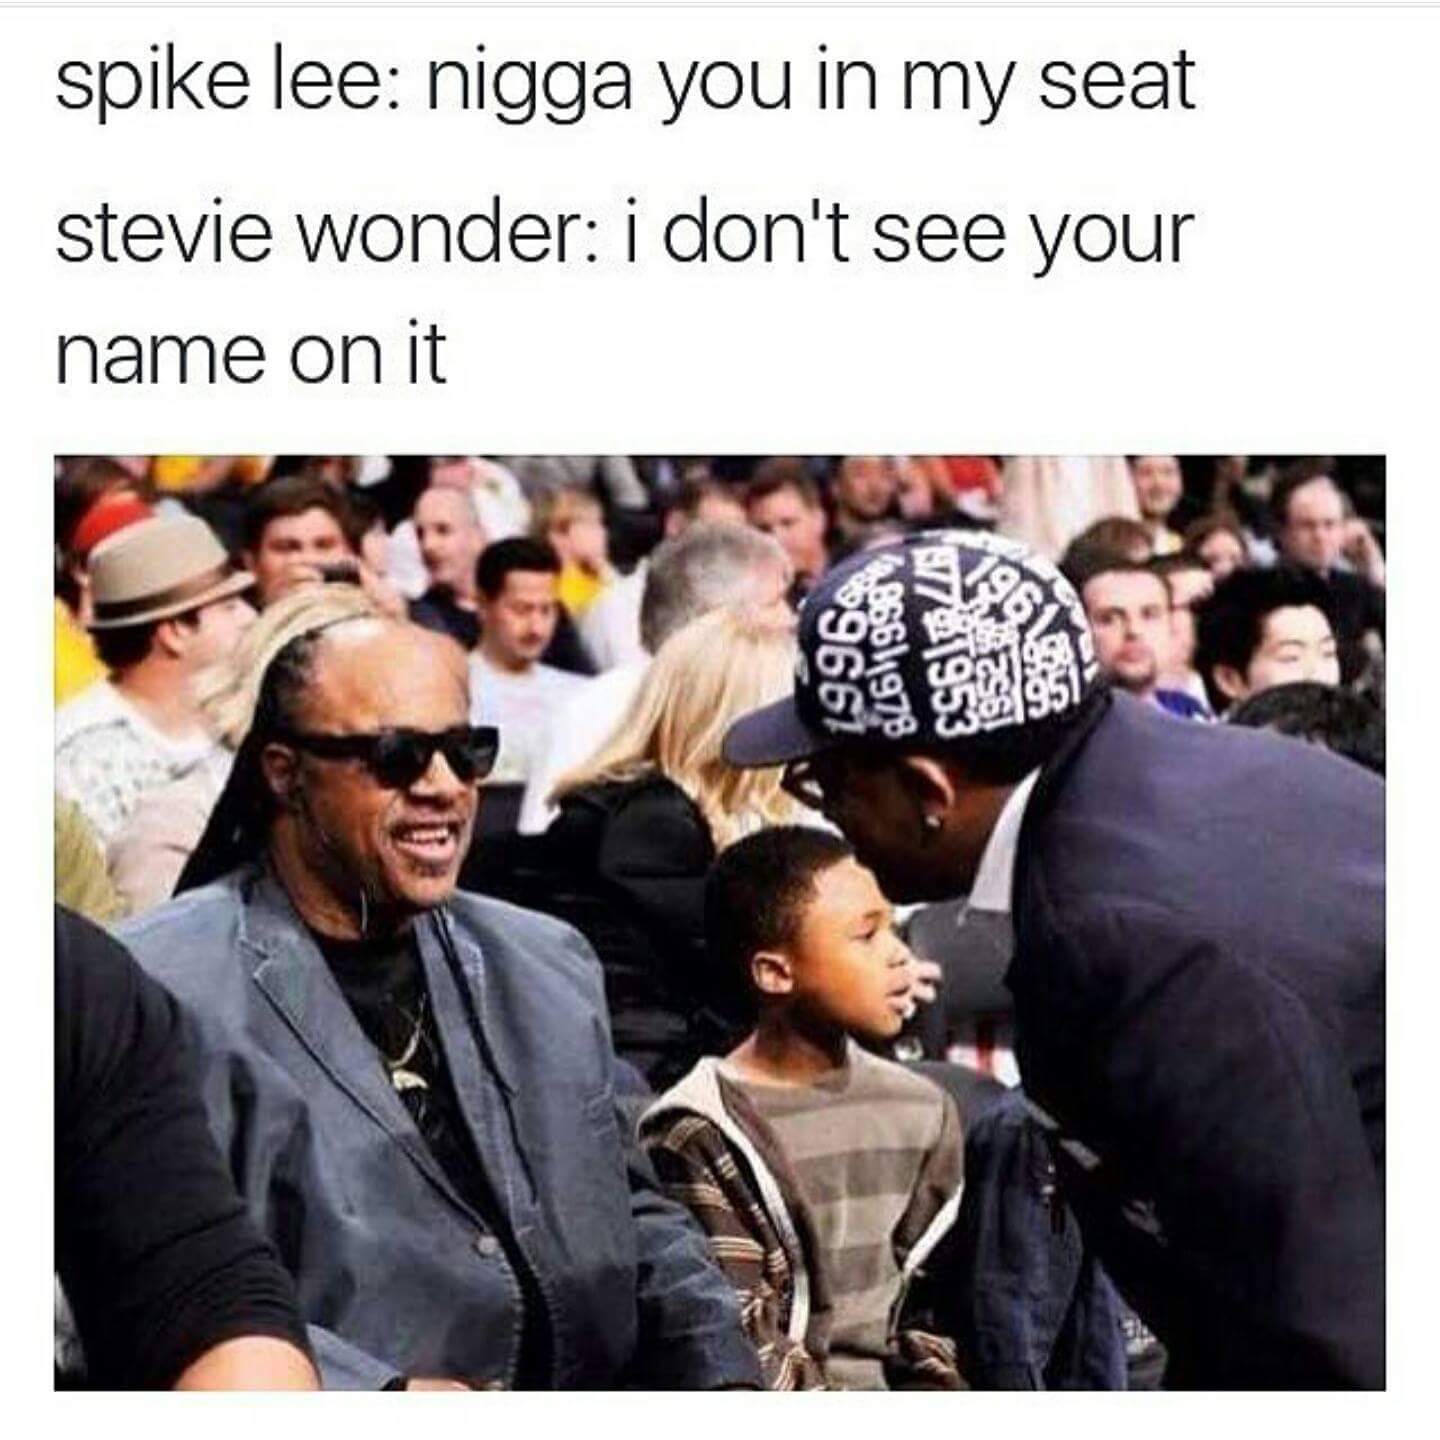 Tuesday meme about a confrontation between Spike Lee and Stevie Wonder